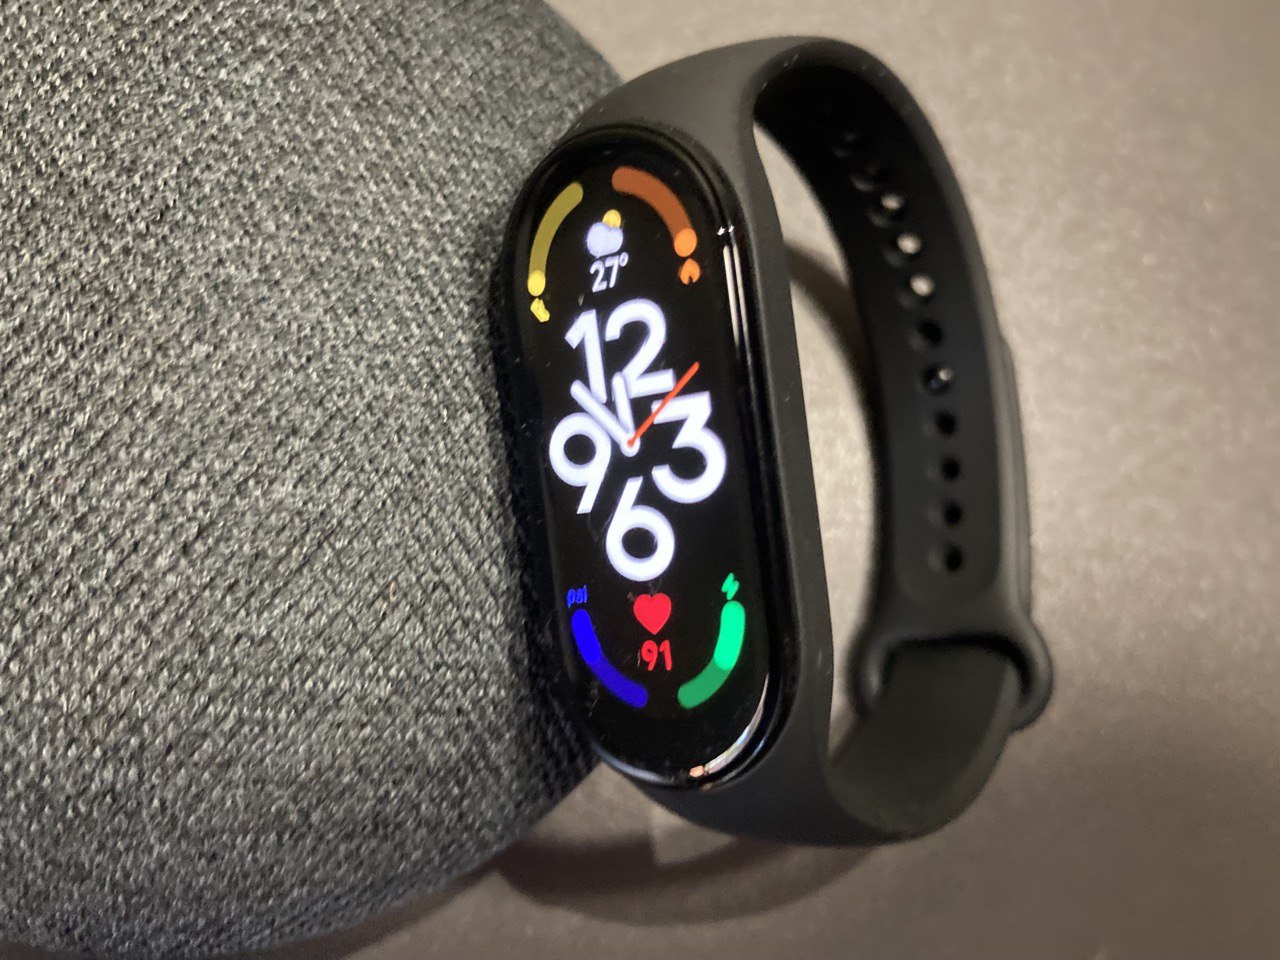 Xiaomi Smart Band 7 review: Entry-level health & fitness tracking!